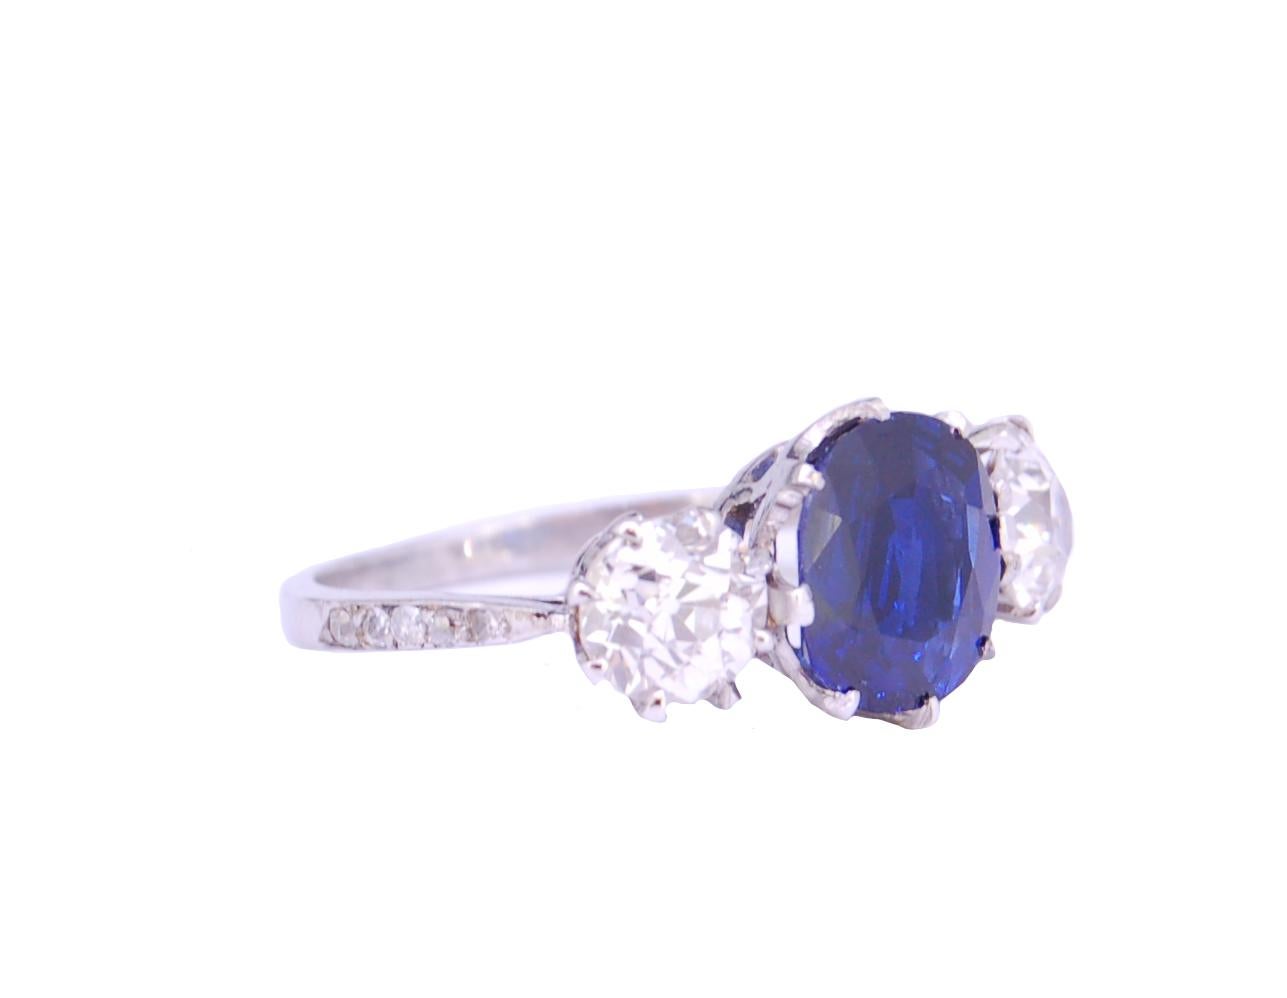 2.80 ct. BURMA BLUE SAPPHIRE AND DIAMOND 3-SOTNE RING, central set with a blue sapphire of 2.80 ct. flanked by diamonds totalling 1.60 ct. Size O. 3.8 grams. Accompanied by GCS London report No. 80237-32 stating that the 2.80 ct. blue sapphire is